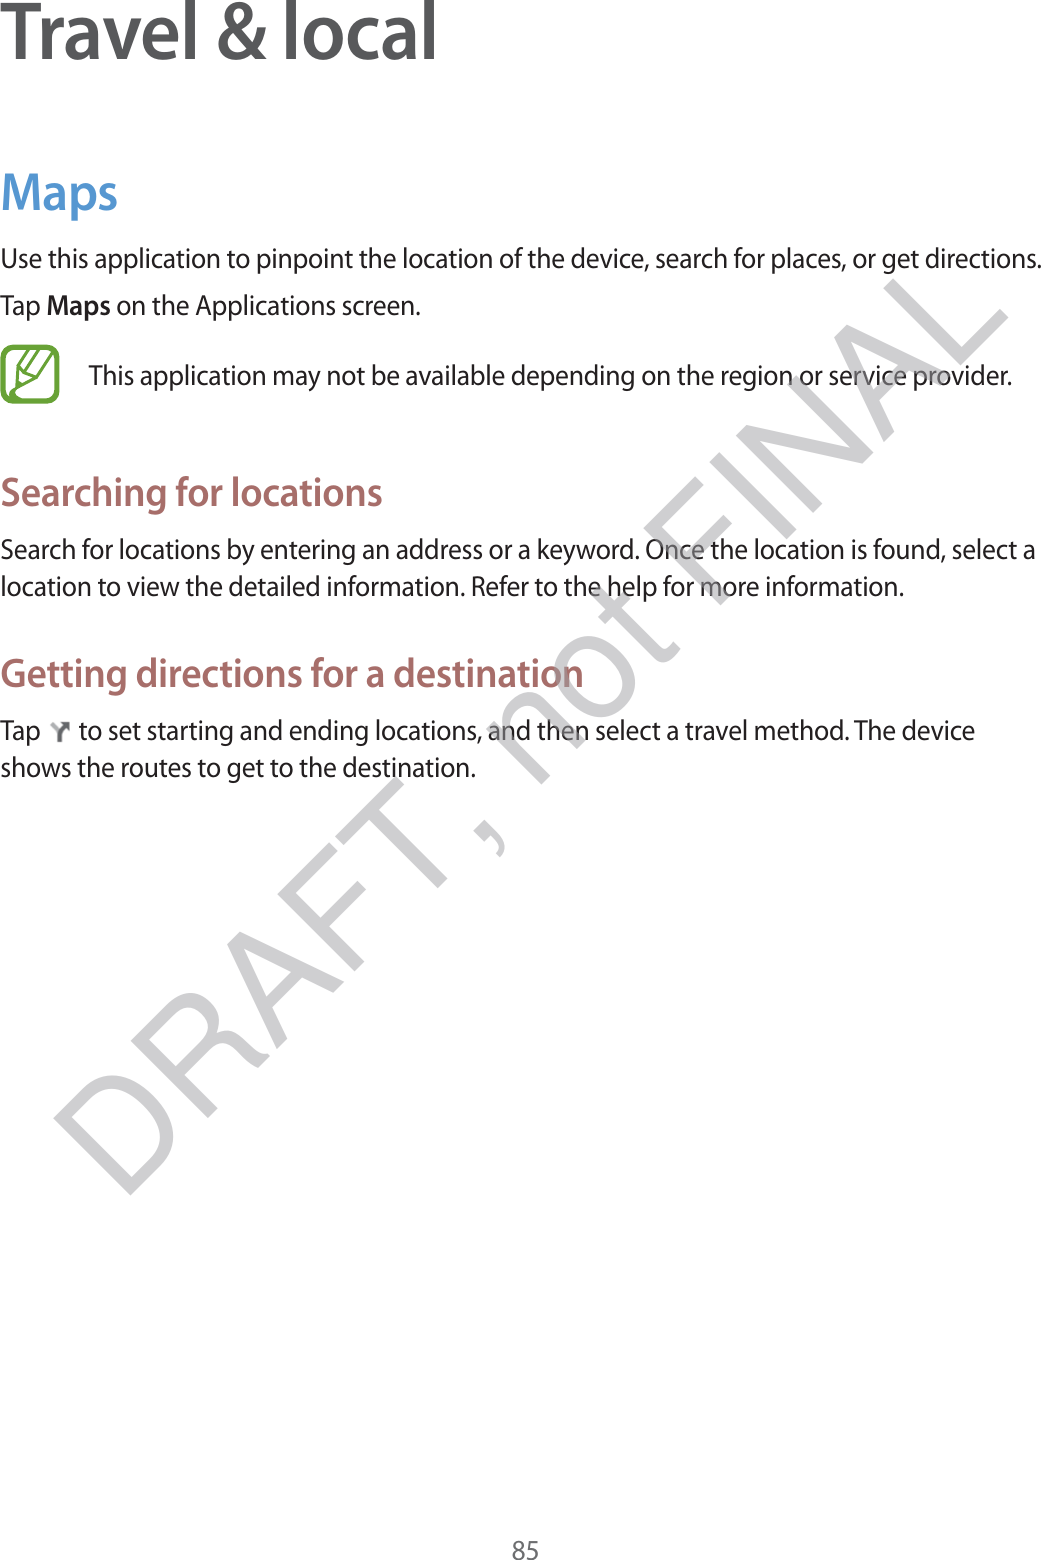 85Travel &amp; localMapsUse this application to pinpoint the location of the device, search for places, or get directions.Tap Maps on the Applications screen.This application may not be available depending on the region or service provider.Searching for locationsSearch for locations by entering an address or a keyword. Once the location is found, select a location to view the detailed information. Refer to the help for more information.Getting directions for a destinationTap   to set starting and ending locations, and then select a travel method. The device shows the routes to get to the destination.DRAFT, not FINAL